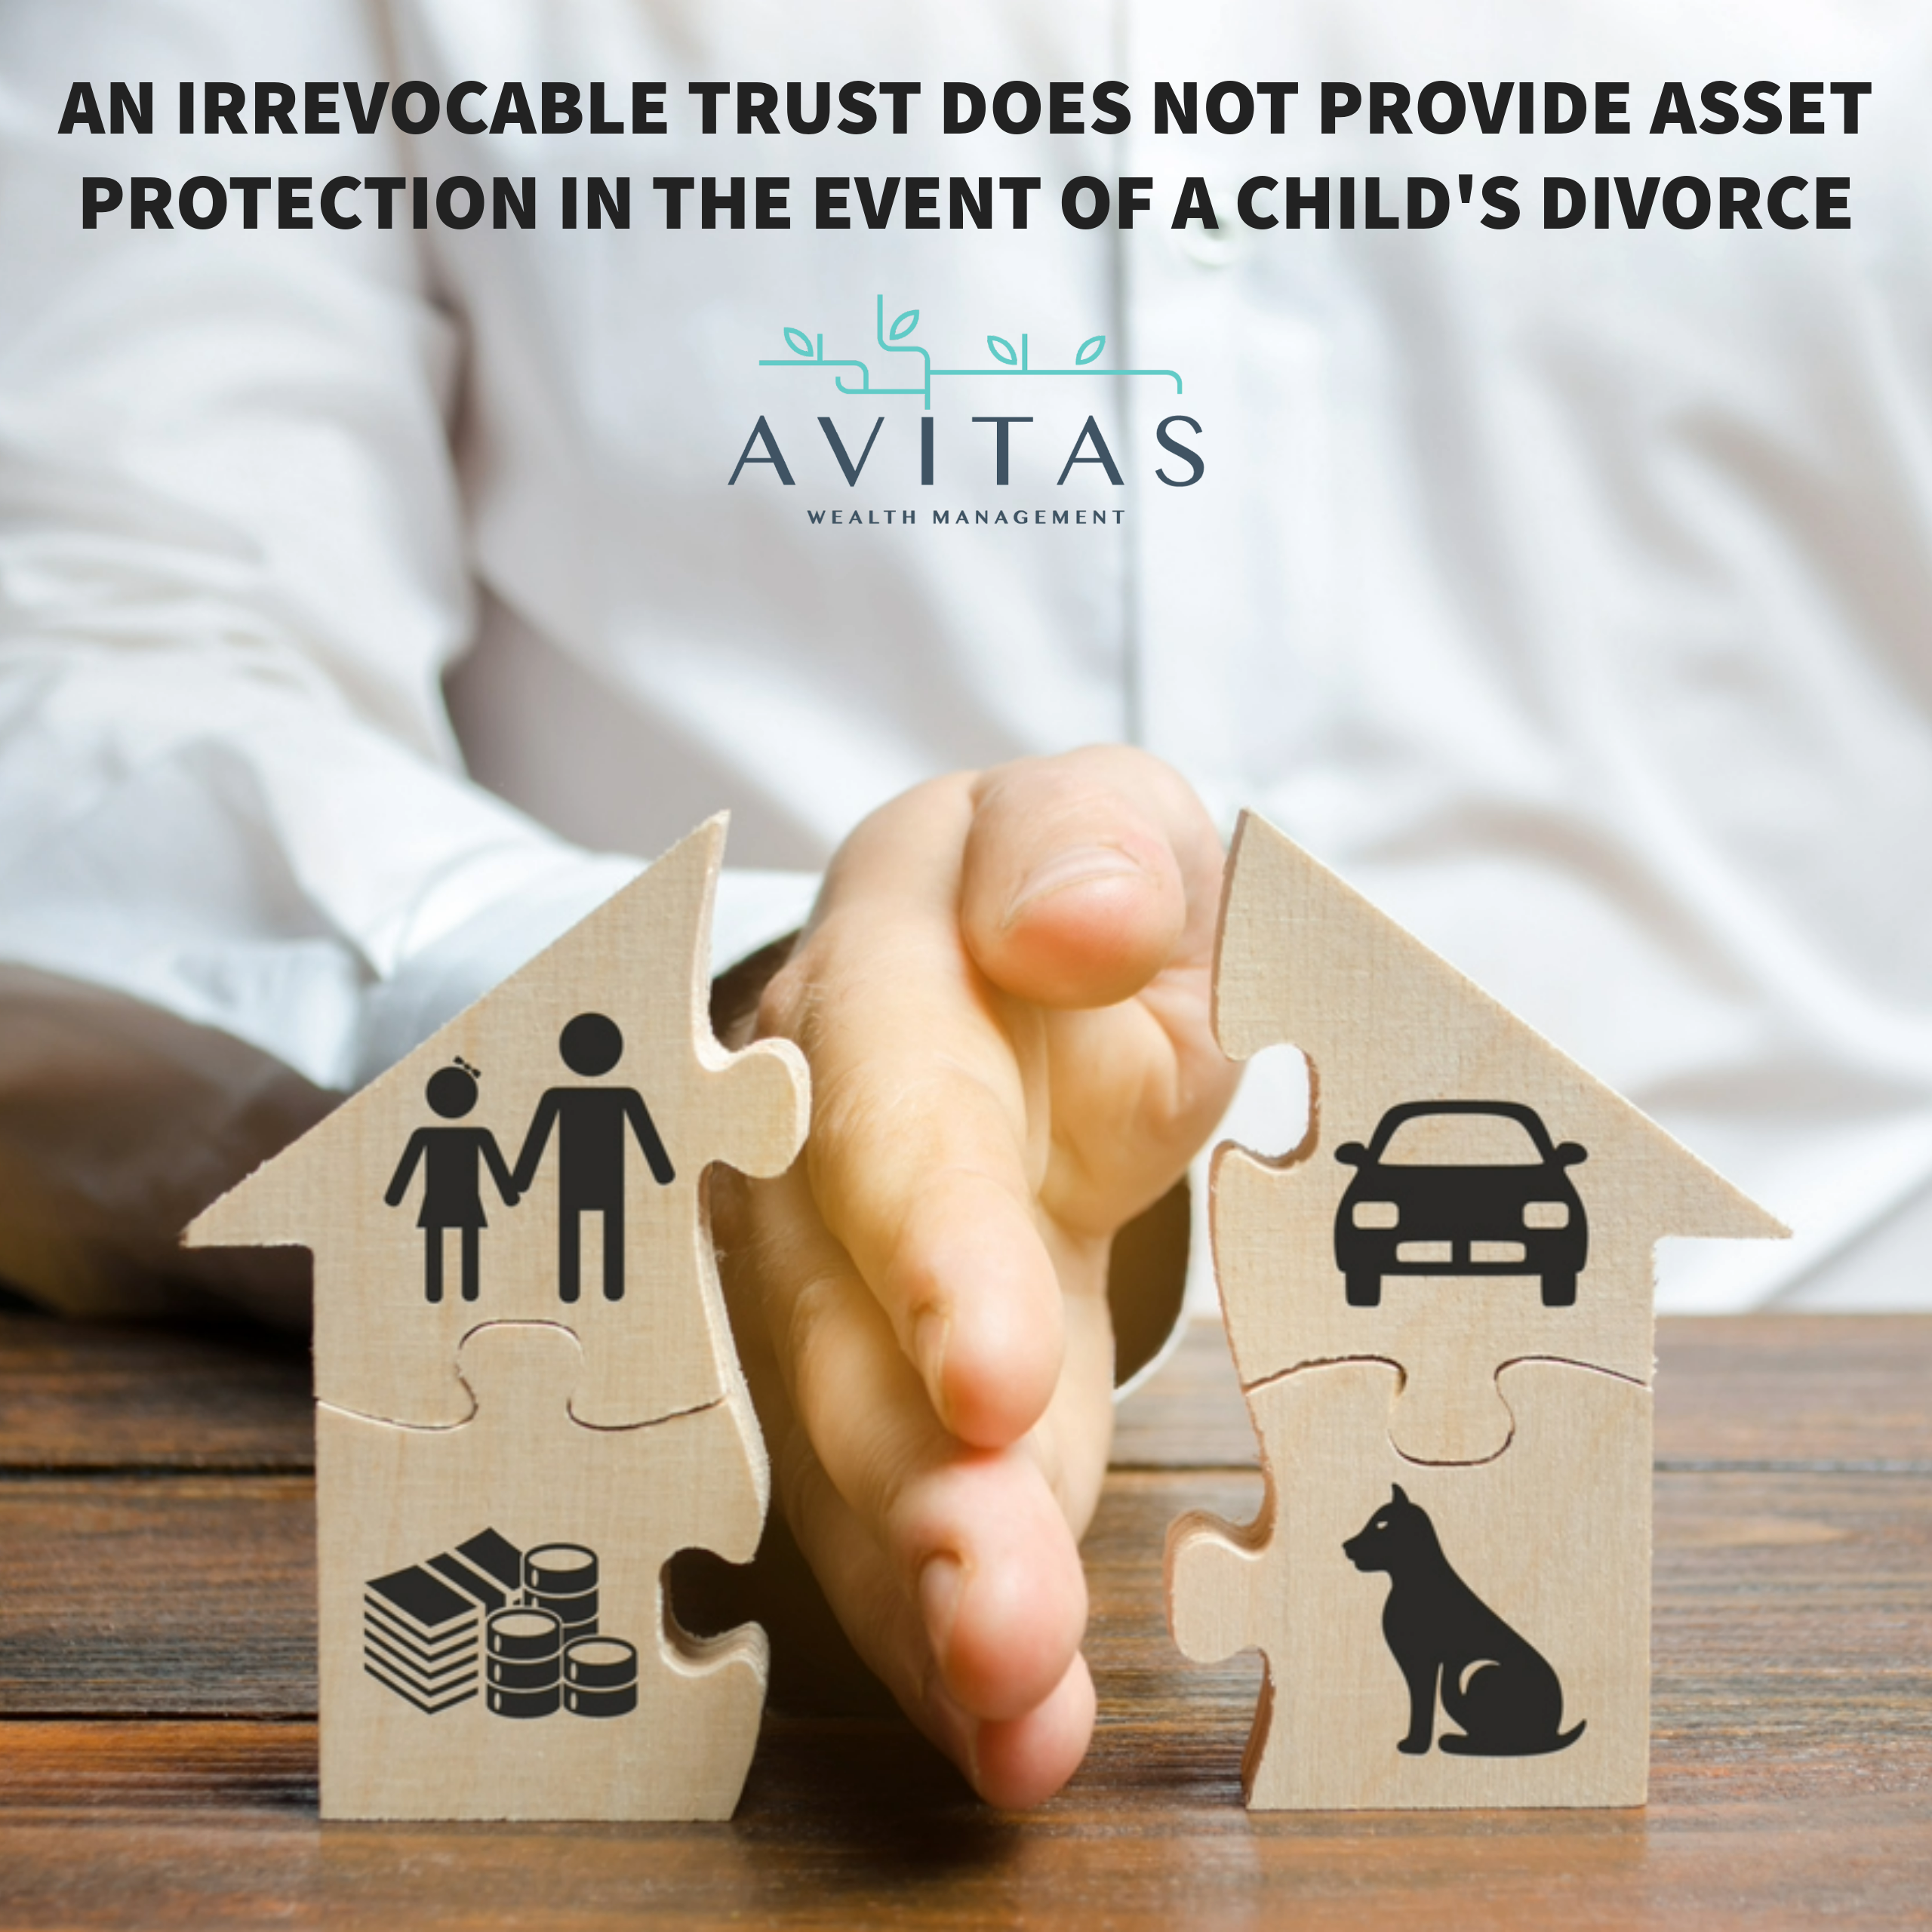 An Irrevocable Trust Does Not Provide Asset Protection In The Event Of A Child’s Divorce.